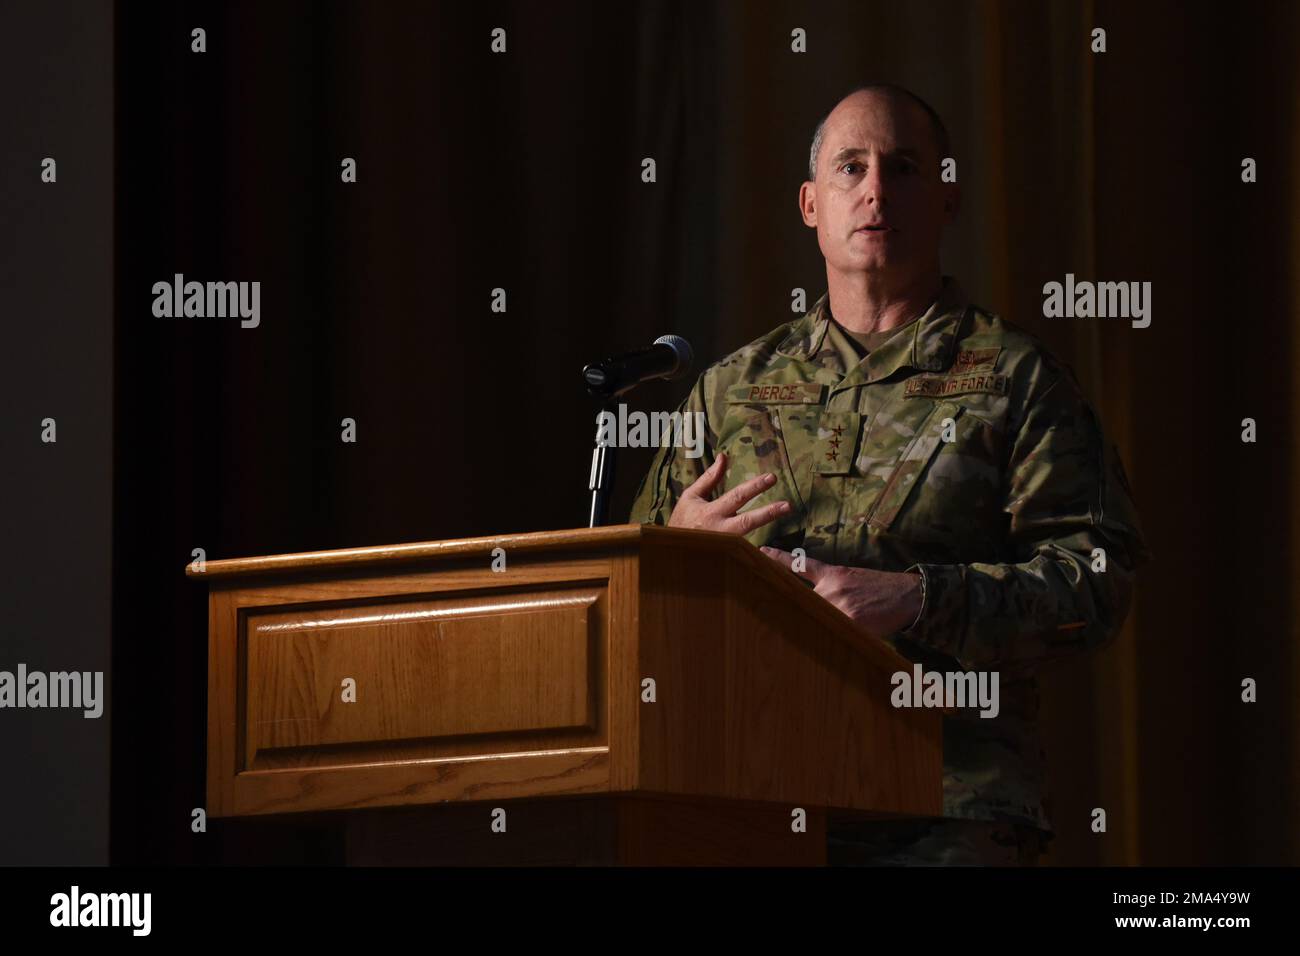 U.S. Air Force Lt. Gen. Kirk S. Pierce, commander of Continental U.S. North American Aerospace Defense Command Region and 1st Air Force (Air Forces Northern and Air Forces Space), speaks during the intelligence, surveillance, and reconnaissance professionals’ graduation ceremony, at Goodfellow Air Force Base, Texas, May 24, 2022. Pierce spoke to the graduates and empowered them to perform intelligence functions and activities to support the United States and allied forces. Stock Photo